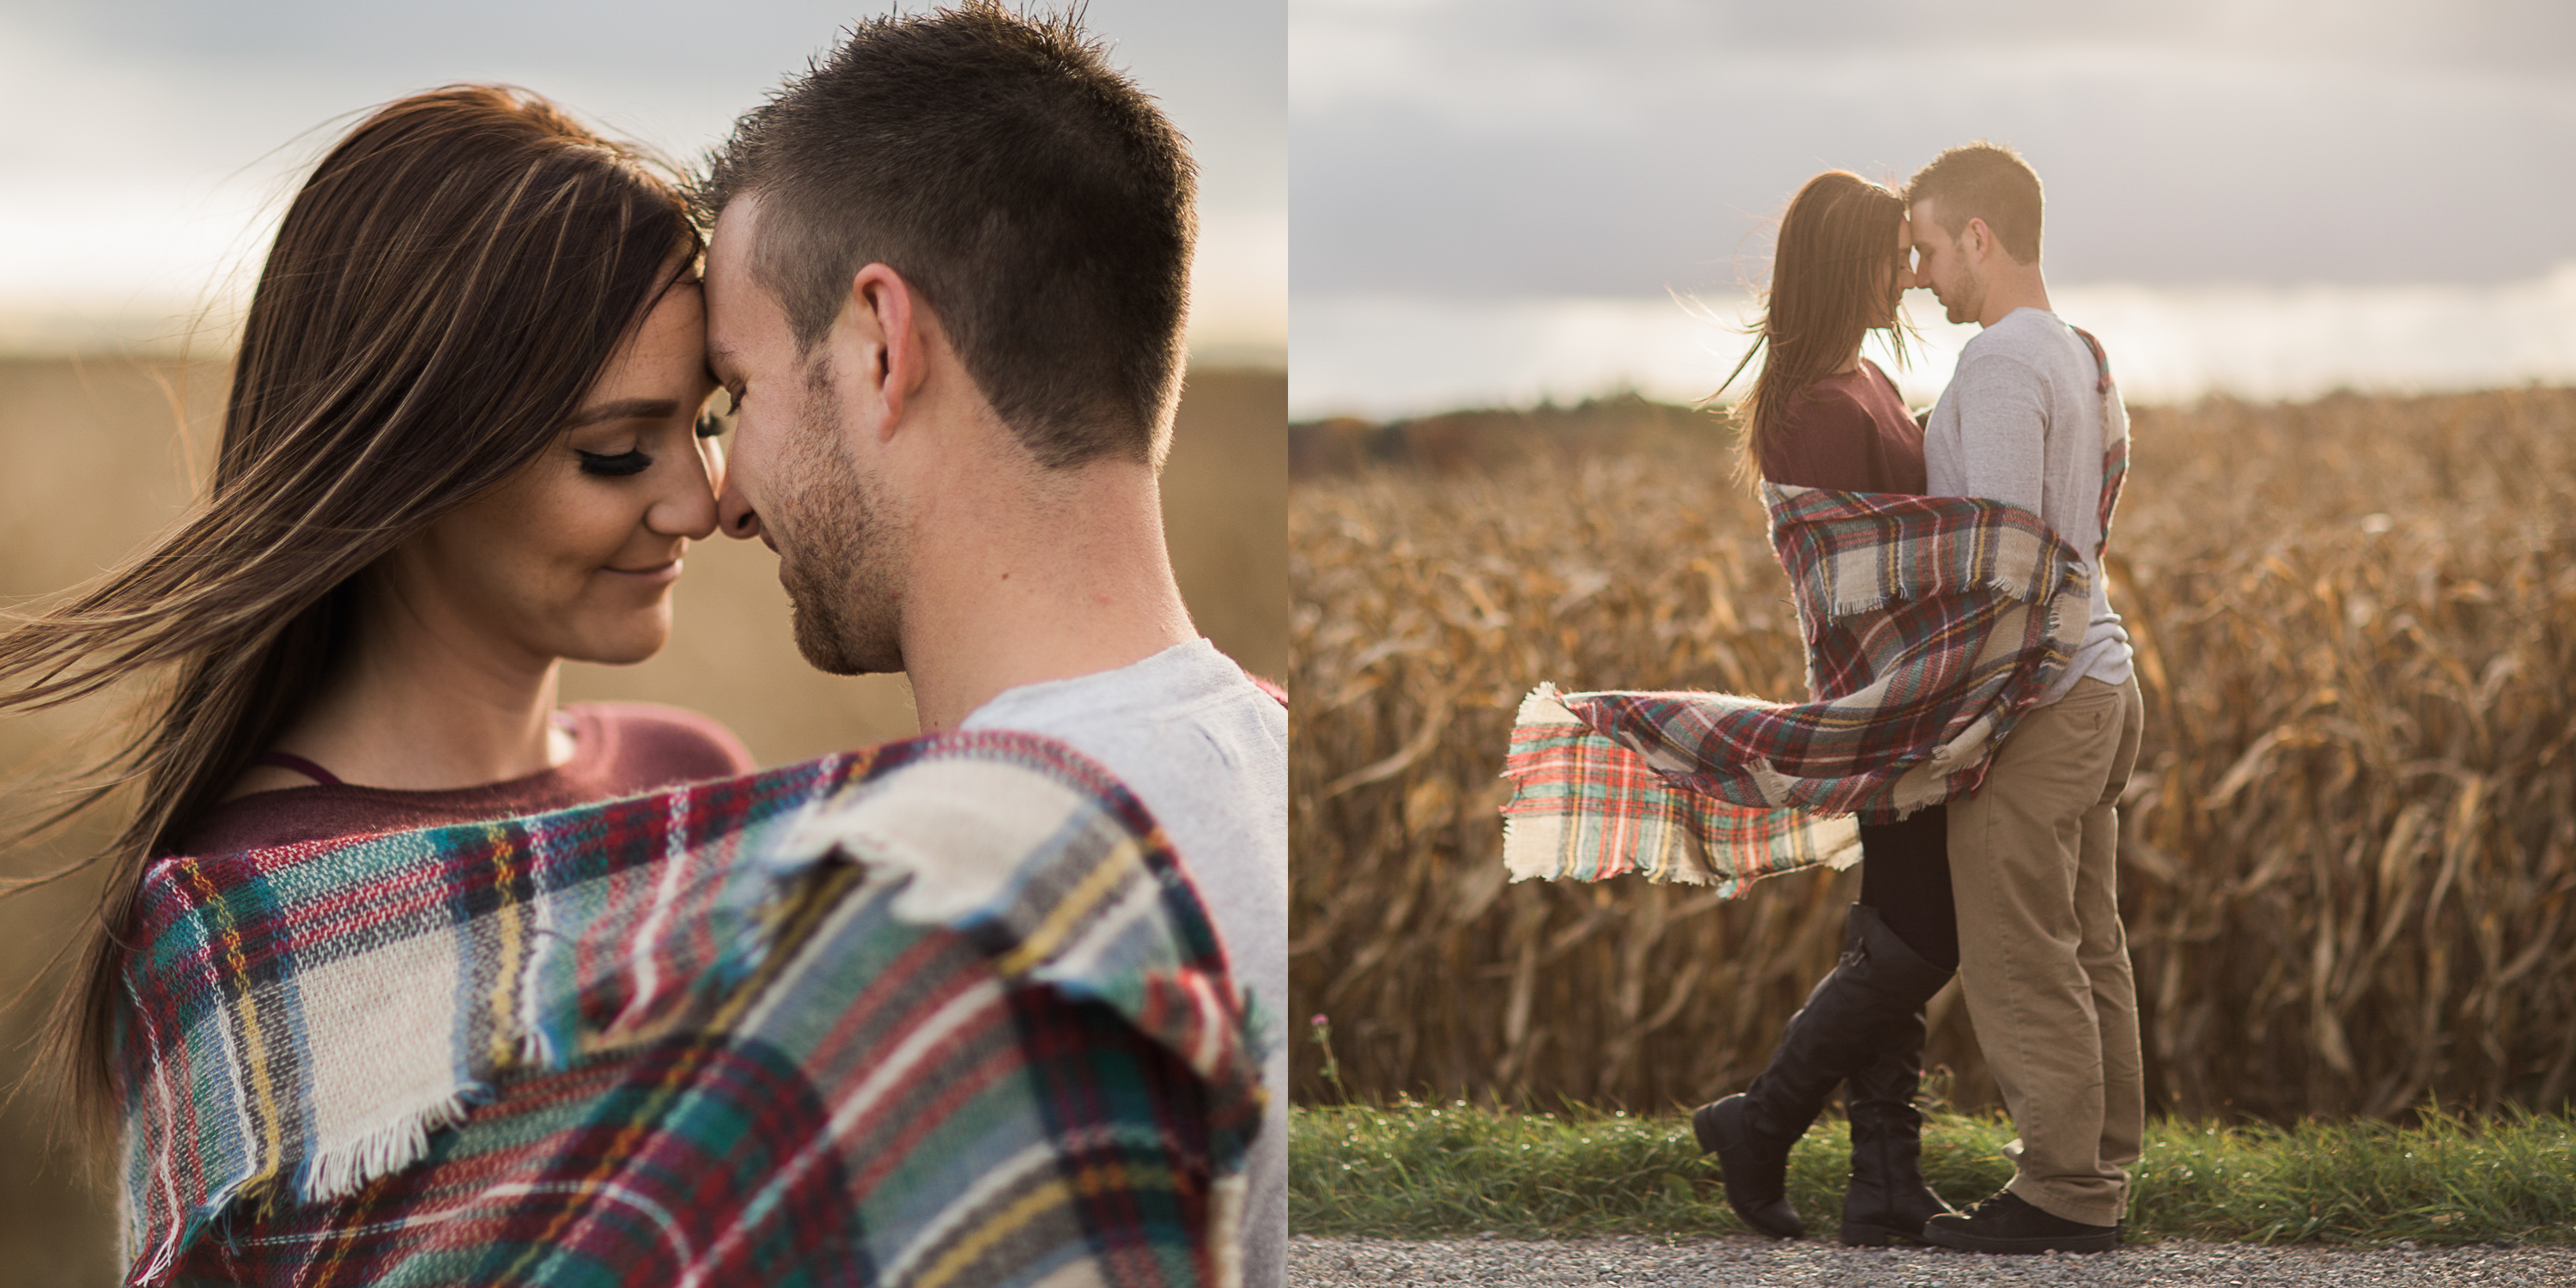 Gorgeous couple wrapped in flannel in the corn field.